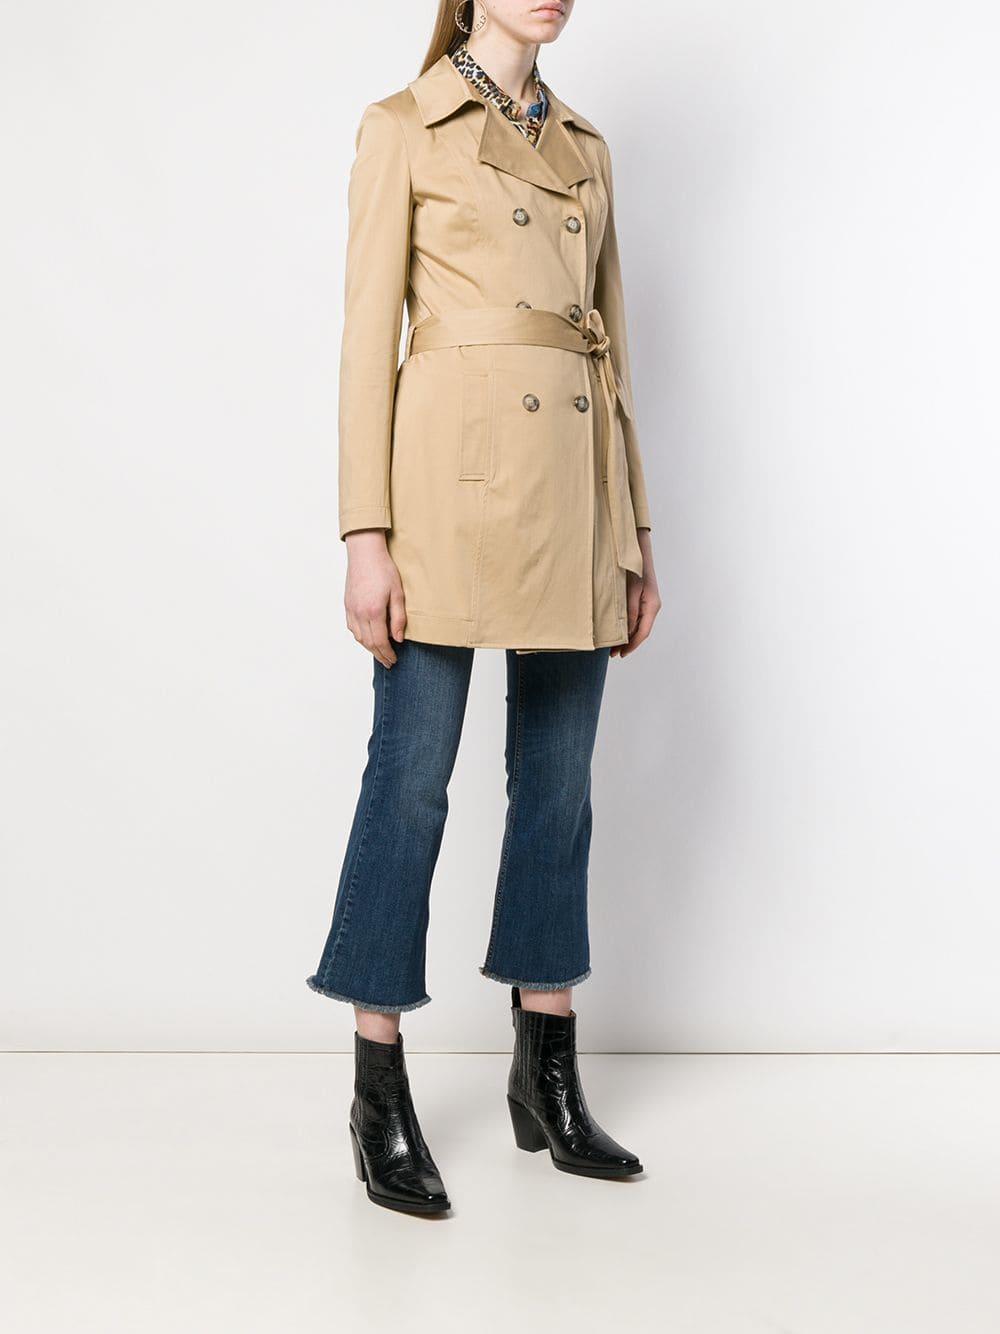 Liu Jo Cotton Double Breasted Trench Coat in Brown - Lyst